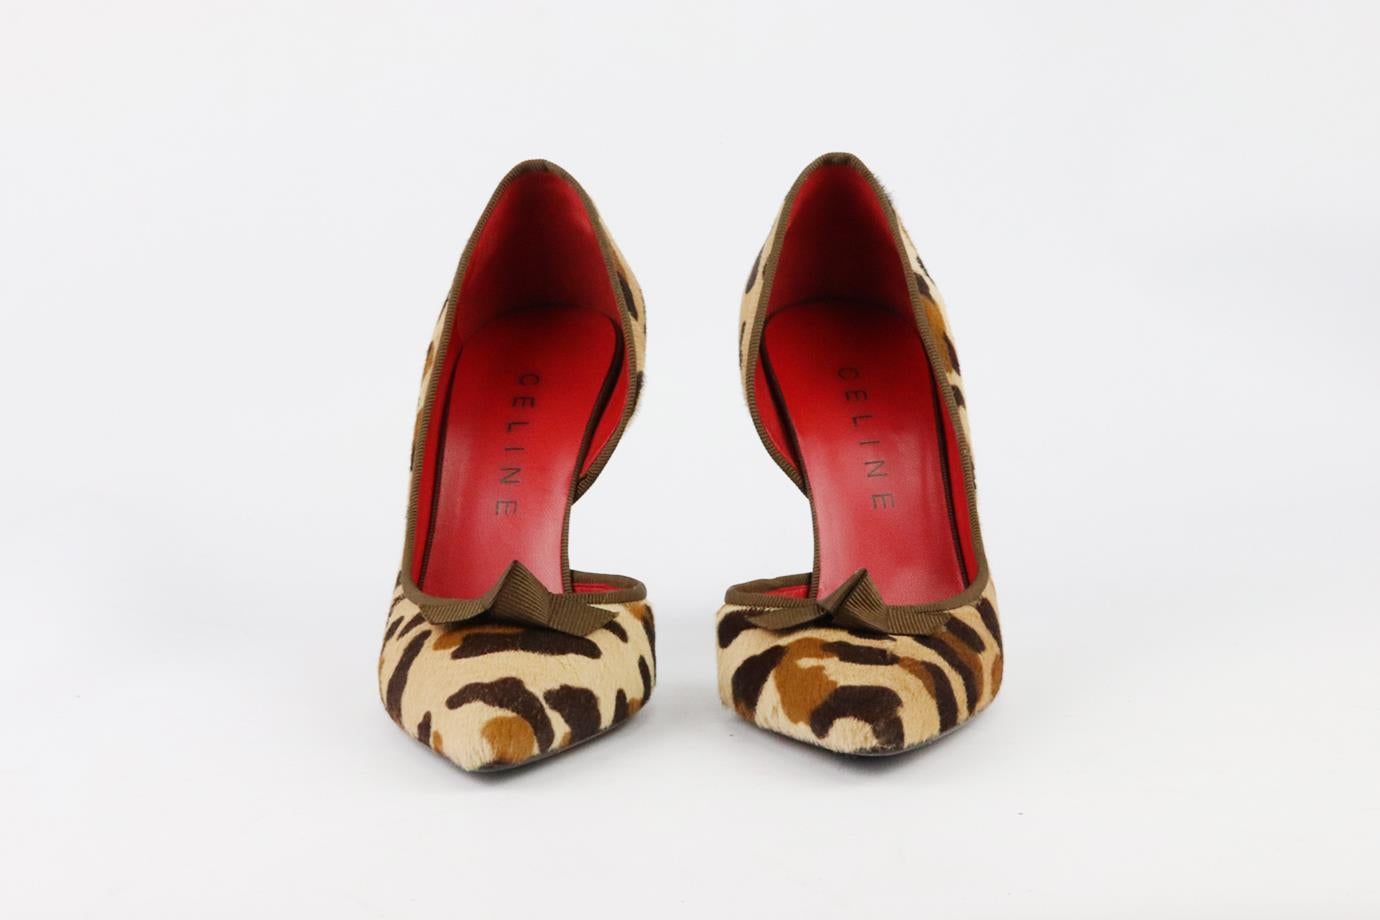 These vintage pumps by Celine are a classic style that will never date, made in Italy from beige, brown and tan leopard-print calf-hair, they have sharp pointed toes and comfortable 76 mm heels with d’orsay silhouette to take you to dinner with